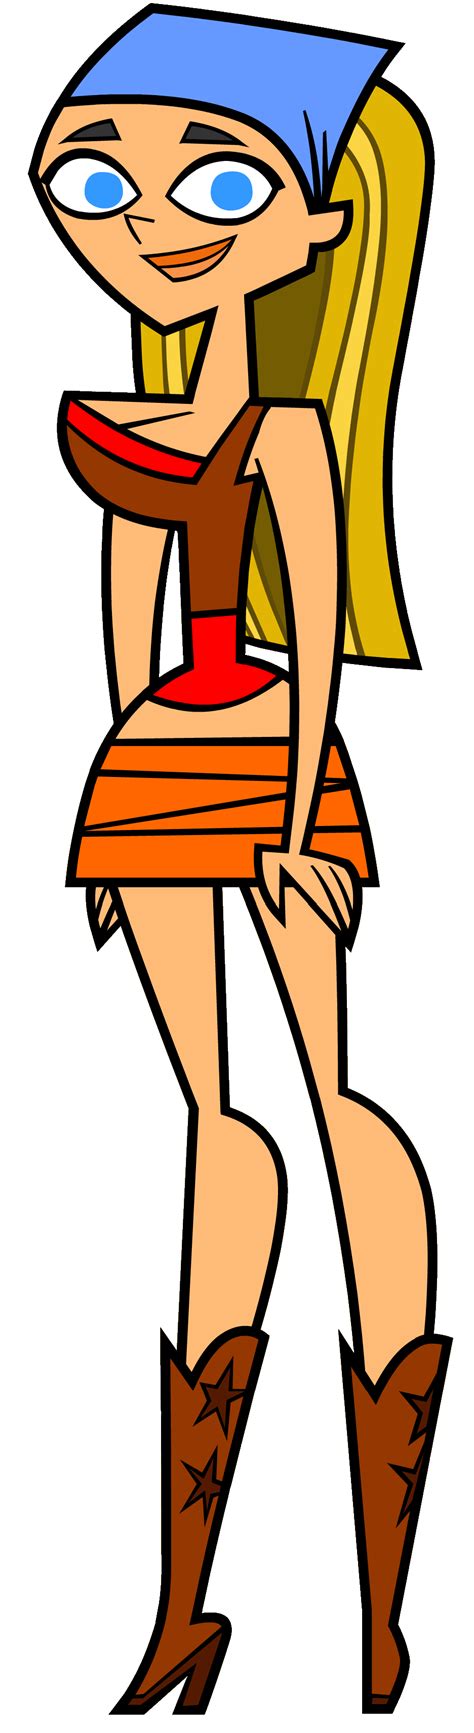 Total drama island lindsay - 4 days ago · Lindsay, labeled The Dumb Princess, is a major character in the Total Drama series. She appears as a supporting protagonist in Total Drama Island and Total Drama …